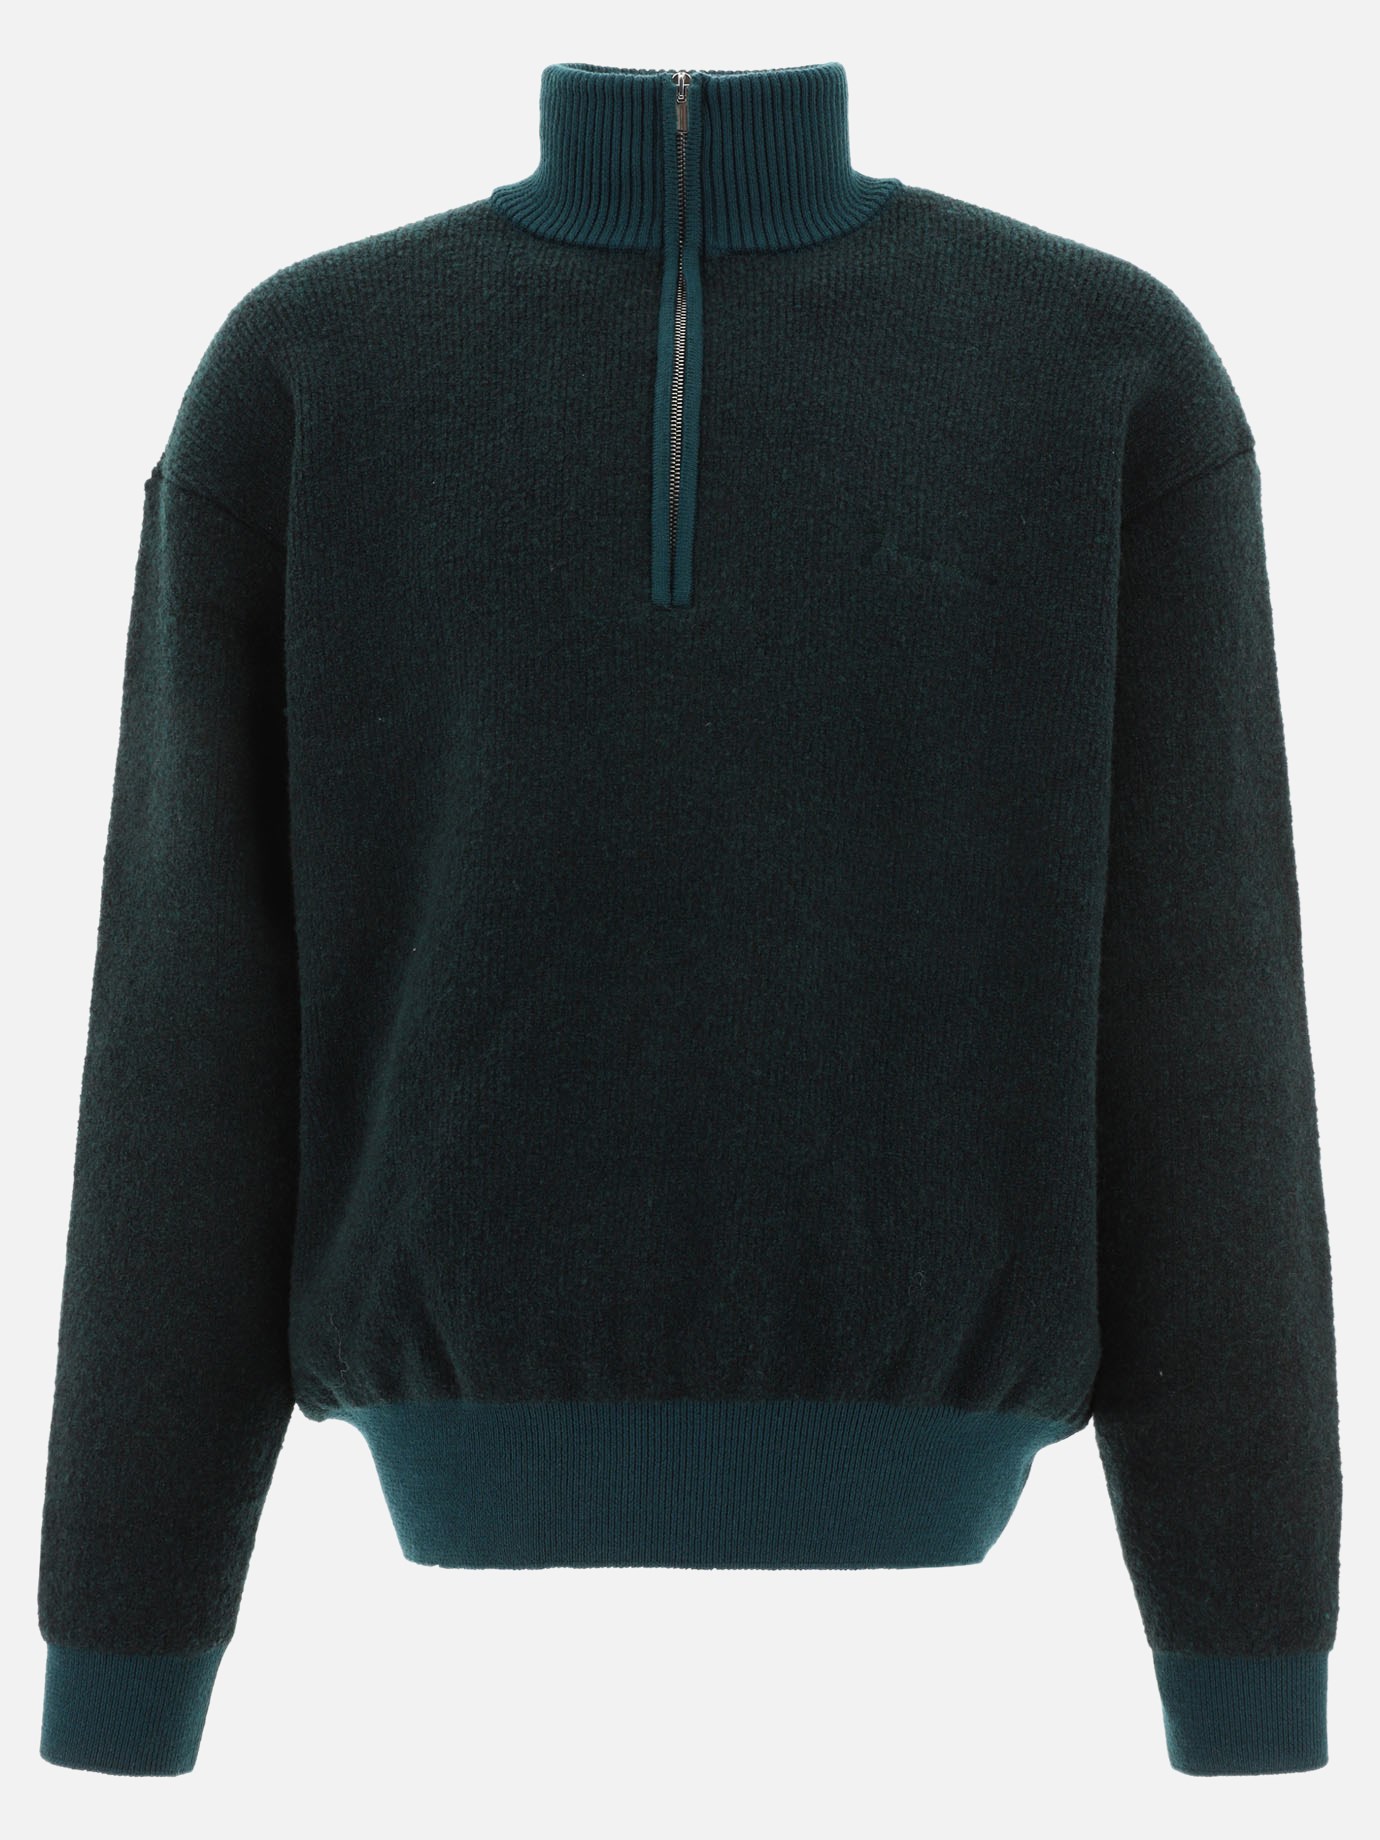 Maglione  La Maille Berger by Jacquemus - 4